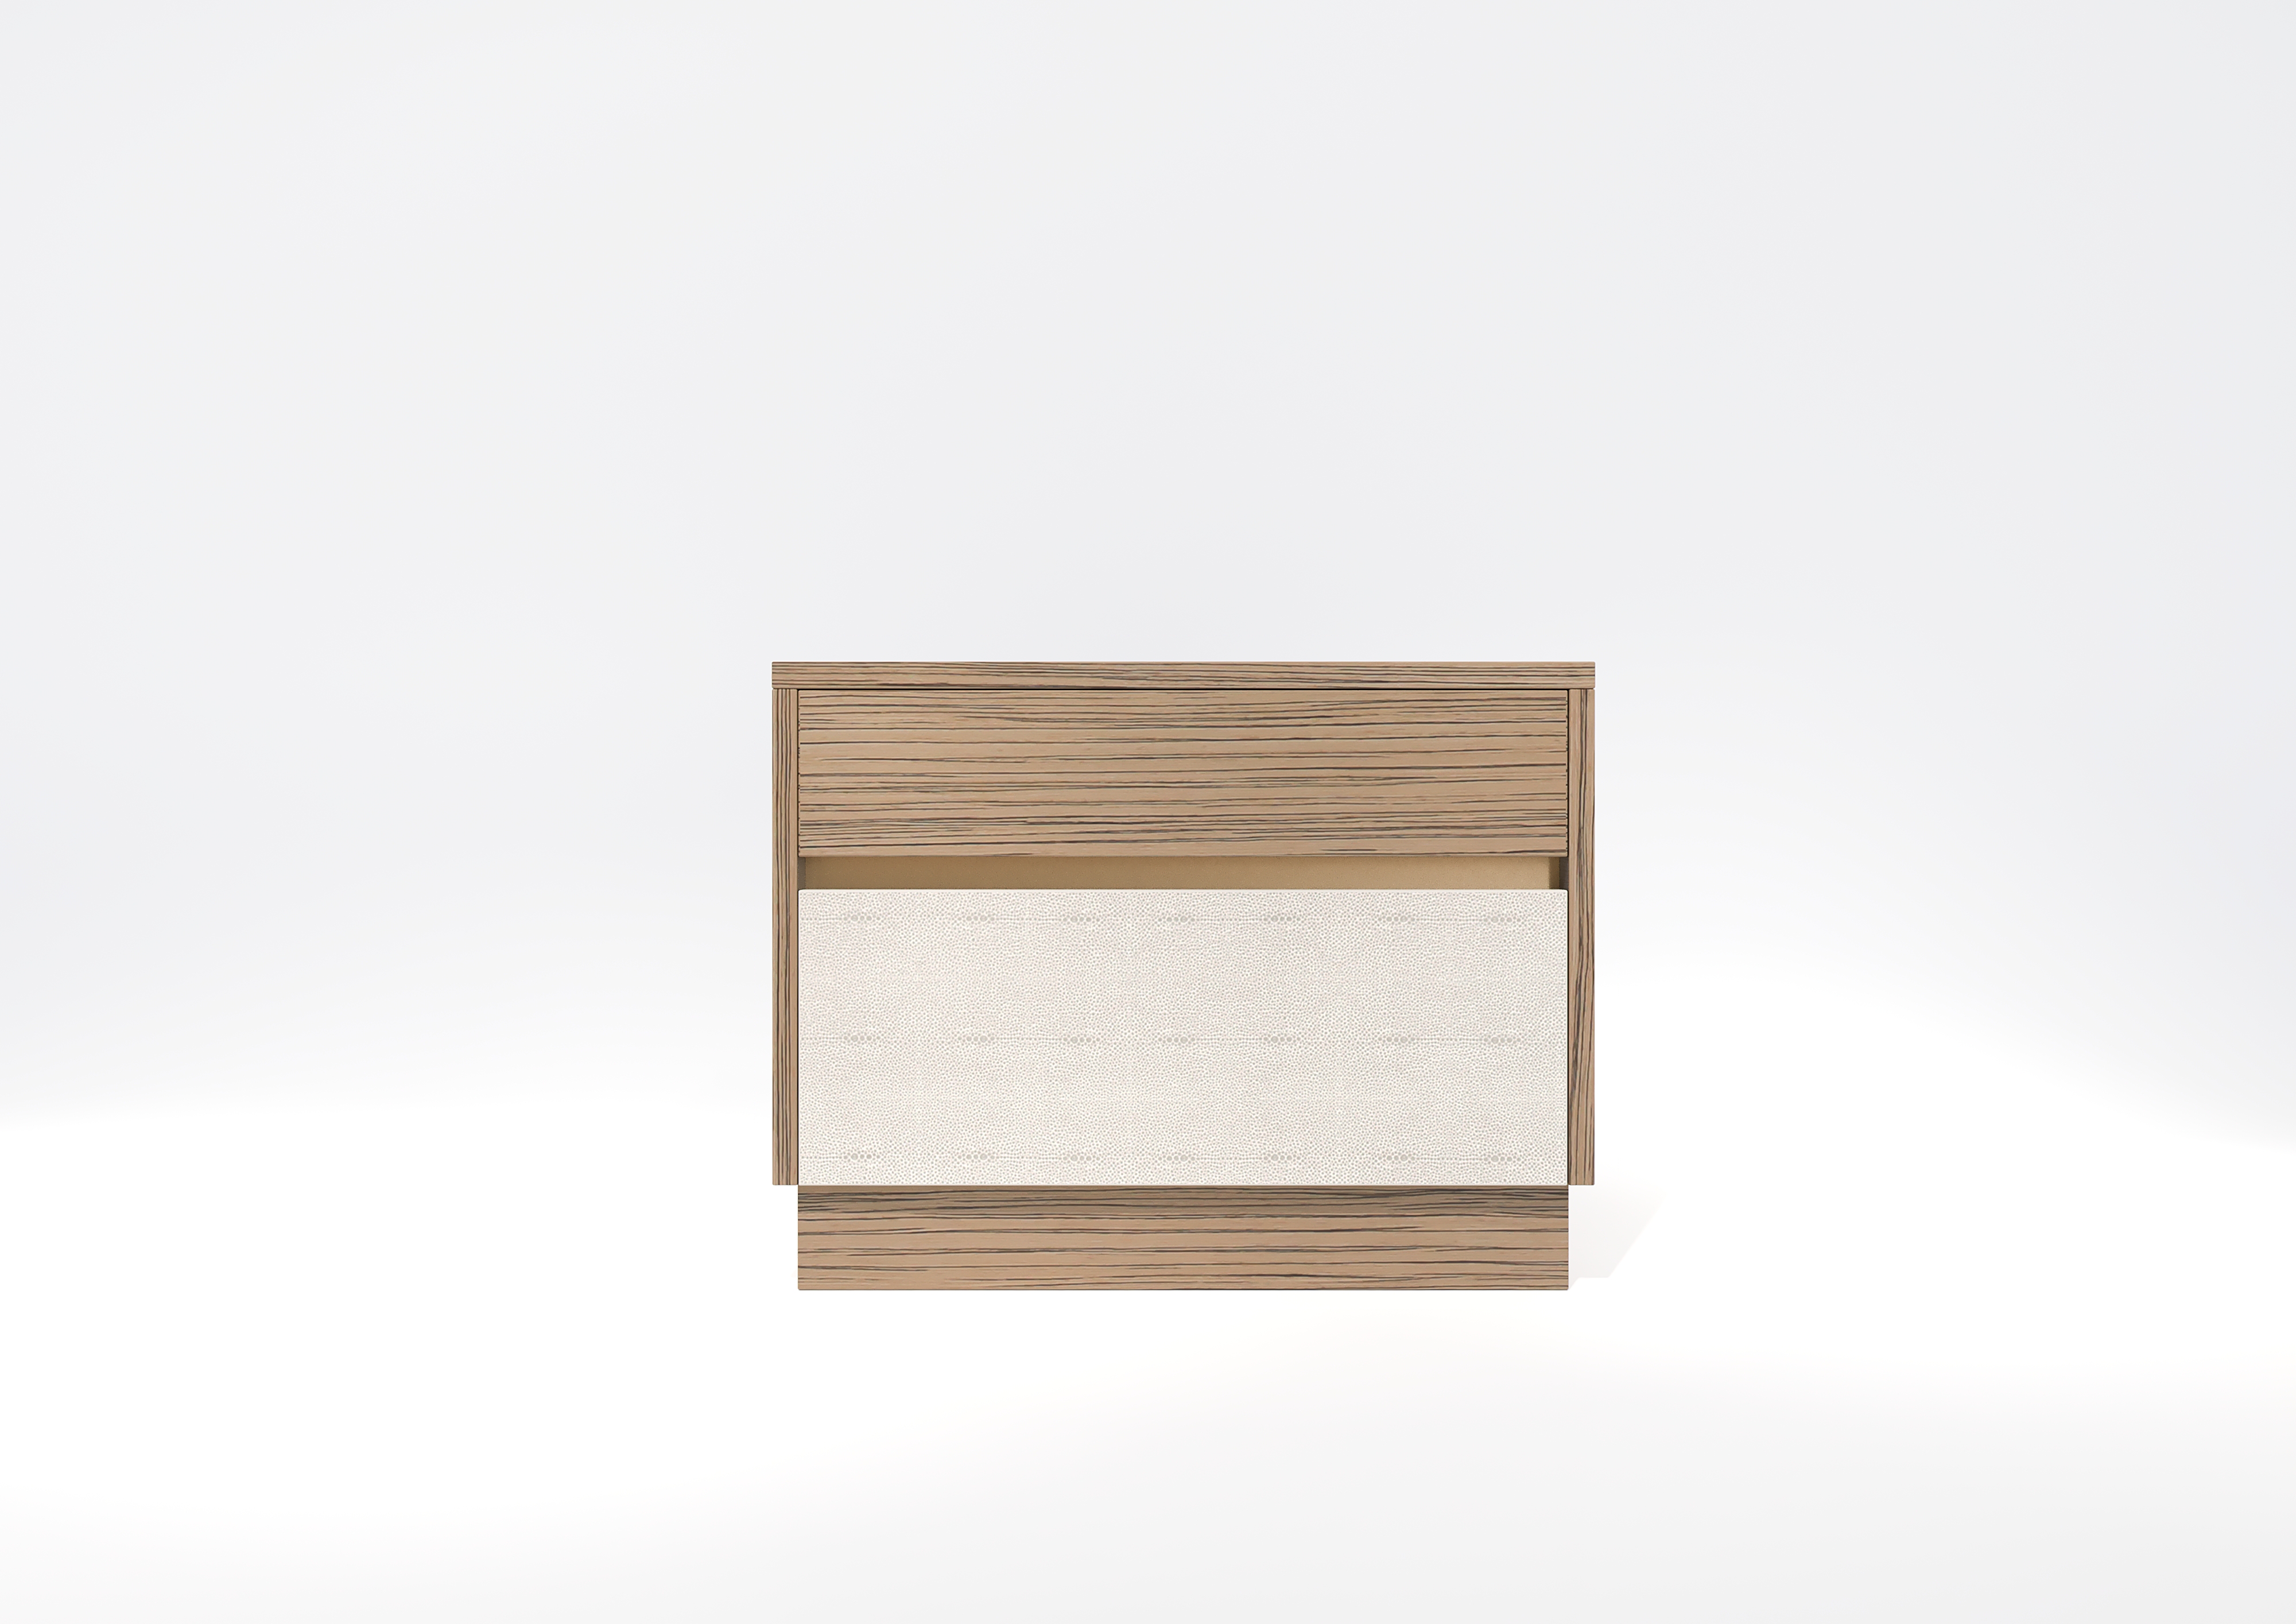 Downing Nightstand V2 Wood Edition #09 – $3,255.00